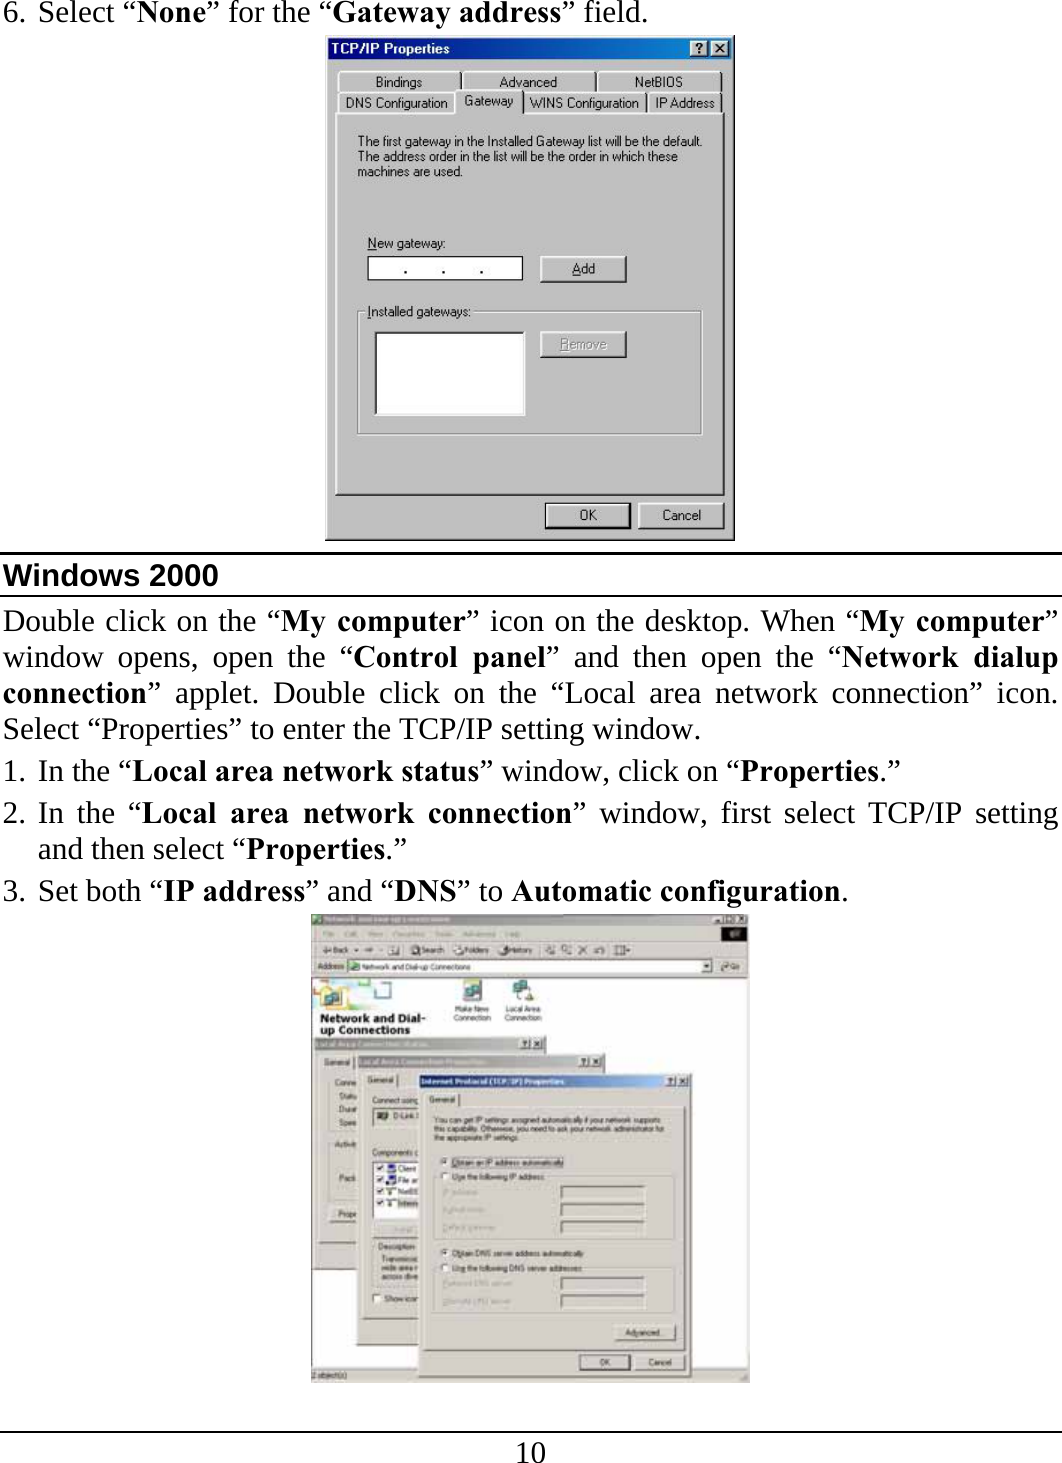 10 6. Select “None” for the “Gateway address” field.  Windows 2000 Double click on the “My computer” icon on the desktop. When “My computer” window opens, open the “Control panel” and then open the “Network dialup connection” applet. Double click on the “Local area network connection” icon. Select “Properties” to enter the TCP/IP setting window. 1. In the “Local area network status” window, click on “Properties.” 2. In the “Local area network connection” window, first select TCP/IP setting and then select “Properties.” 3. Set both “IP address” and “DNS” to Automatic configuration.  